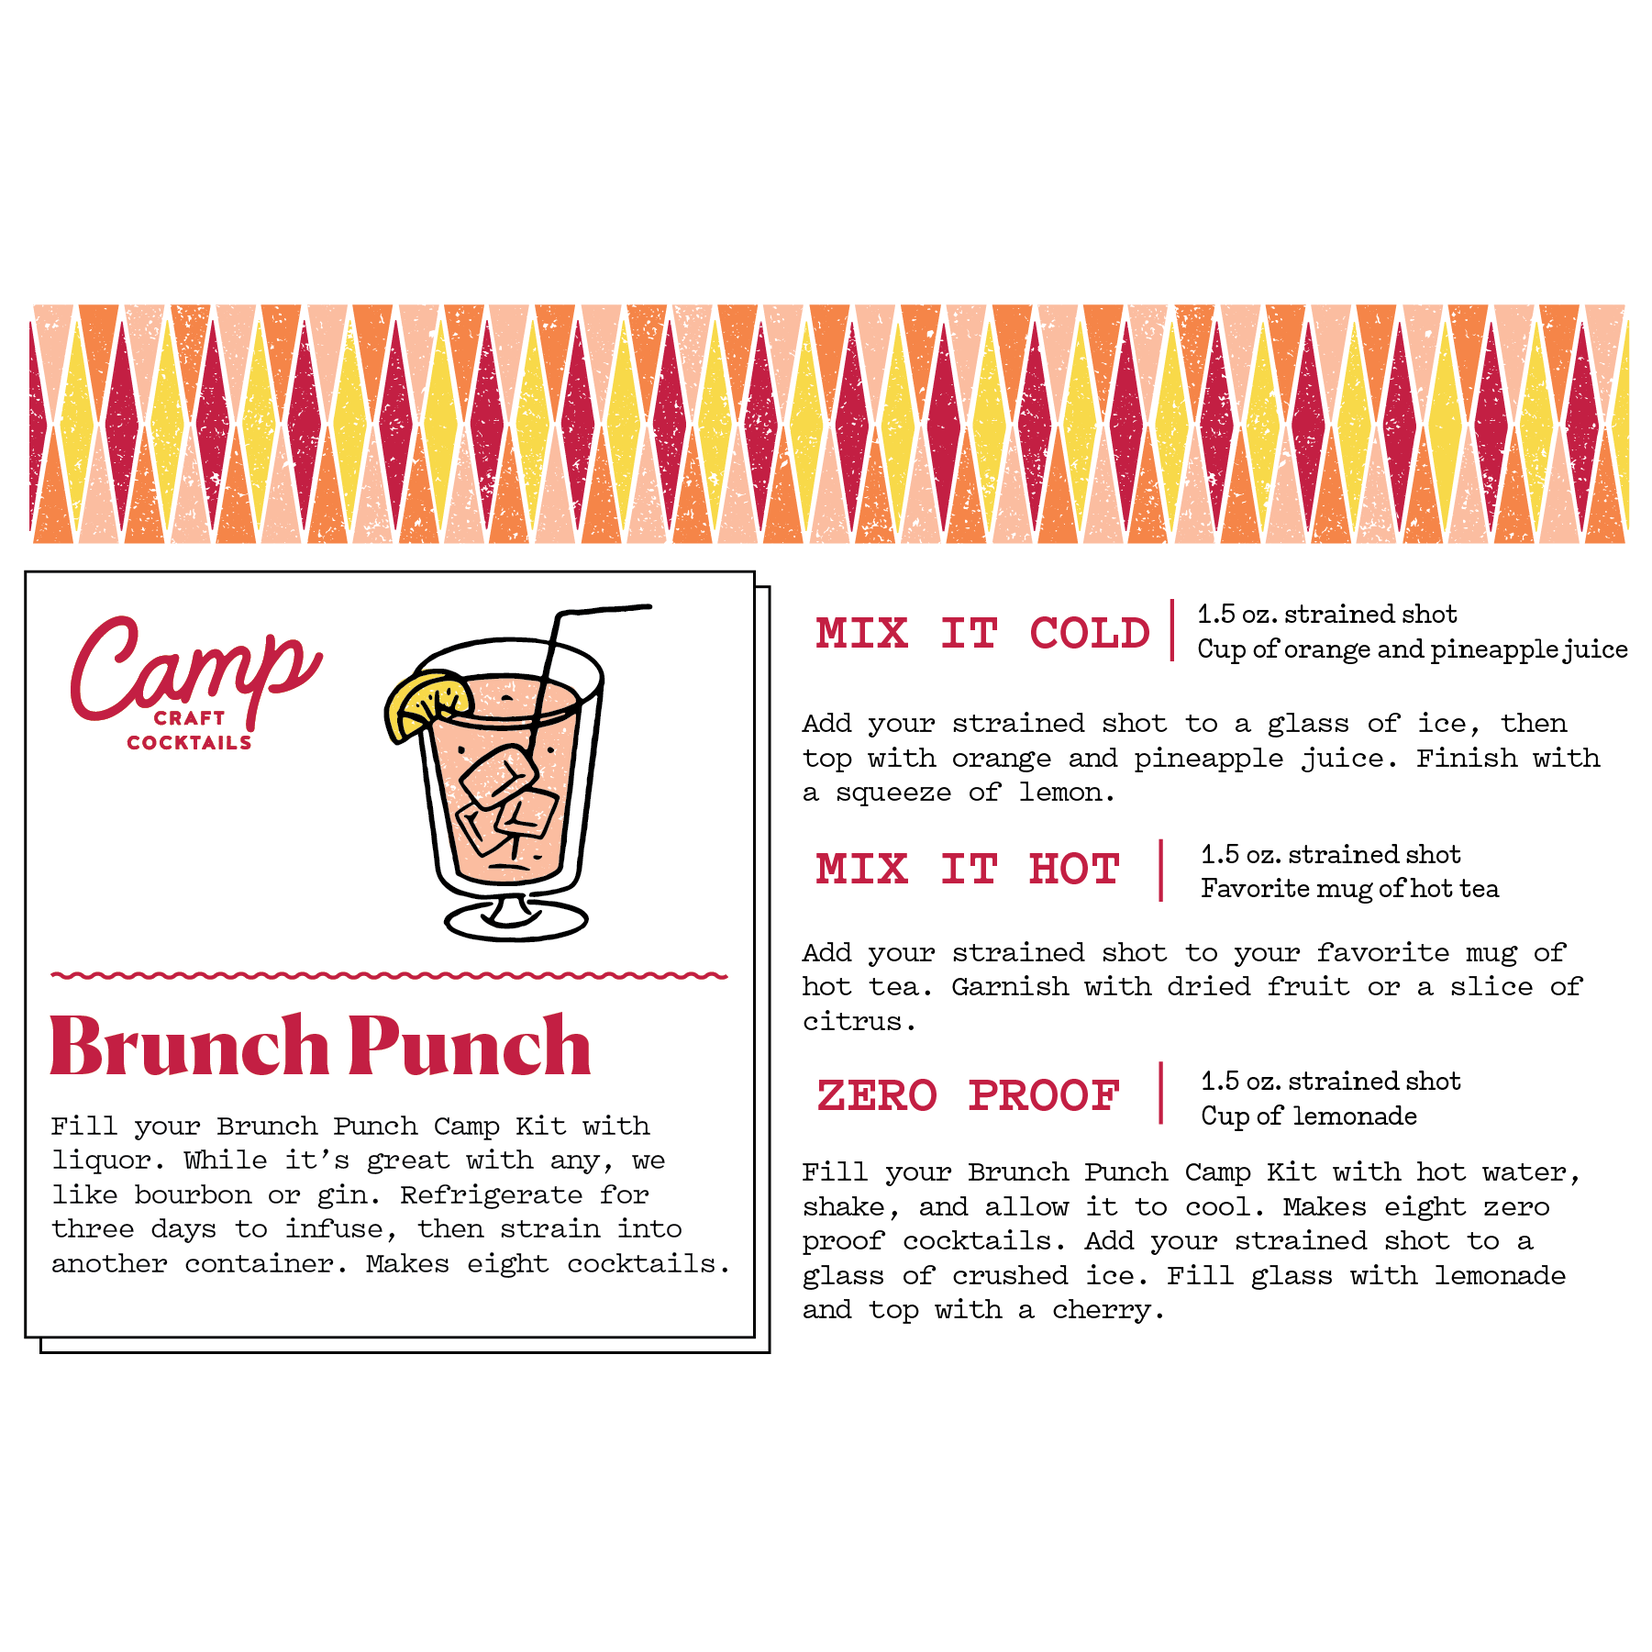 Camp Craft Cocktails Brunch Punch Infusion Kit